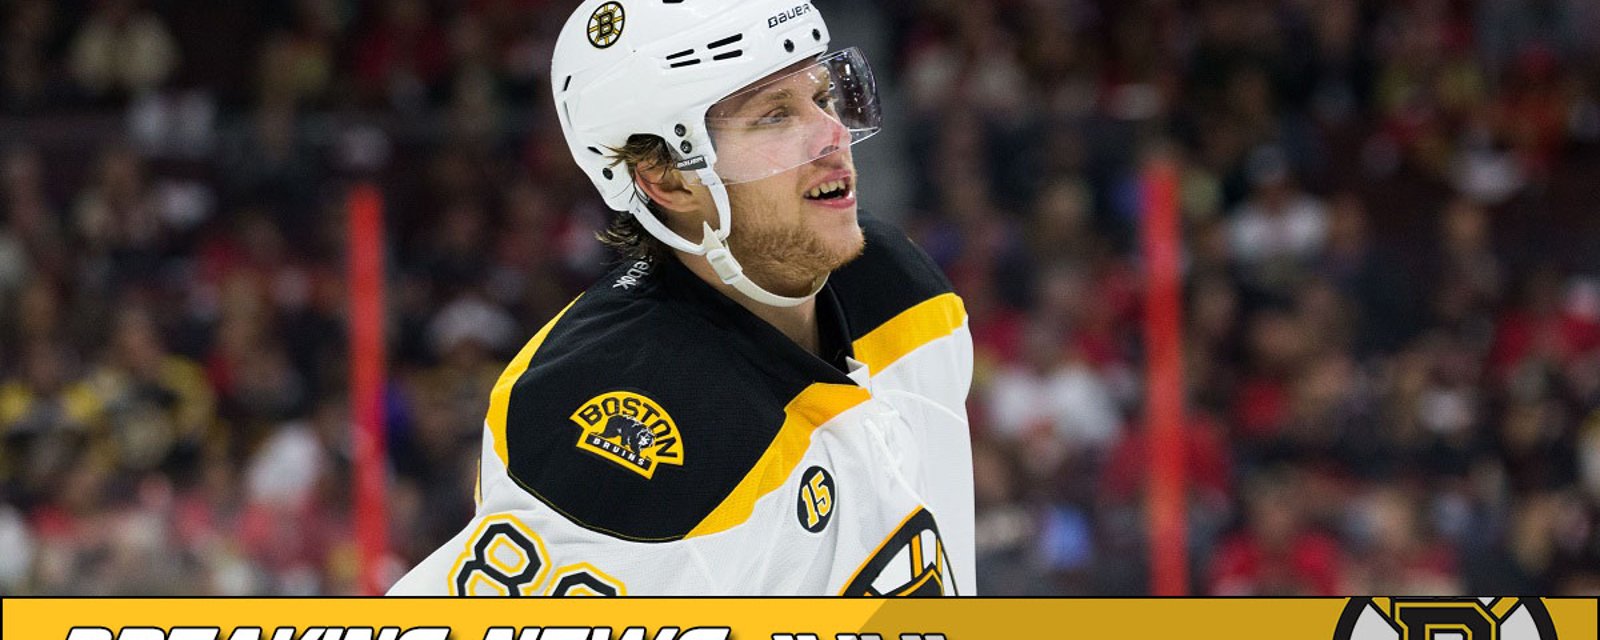 Breaking: Shocking update from the agent for David Pastrnak.